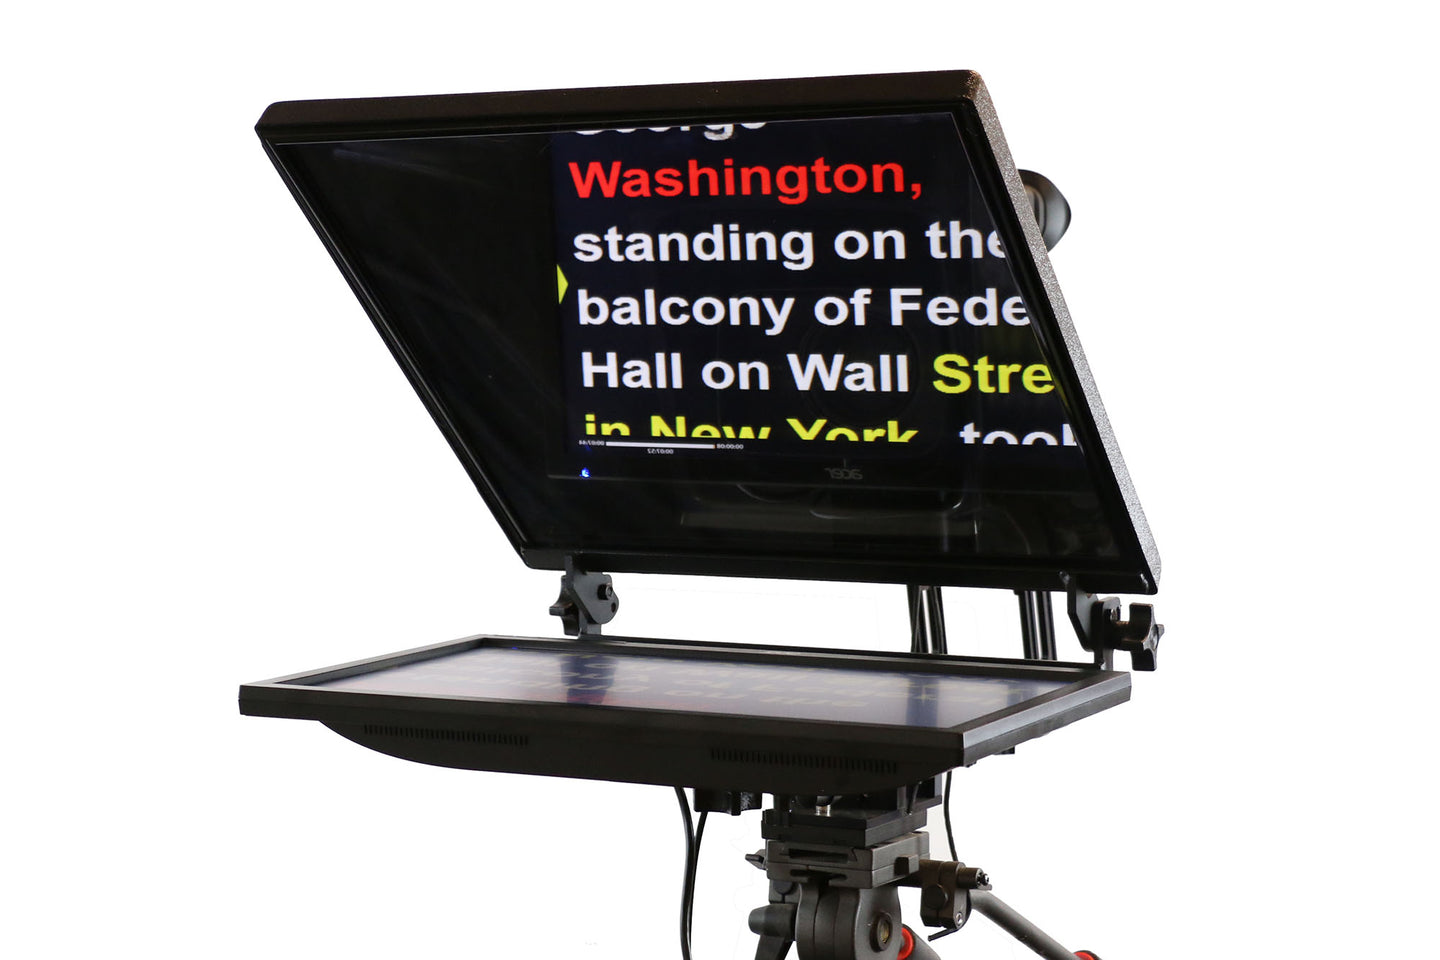 T2-19 Teleprompter